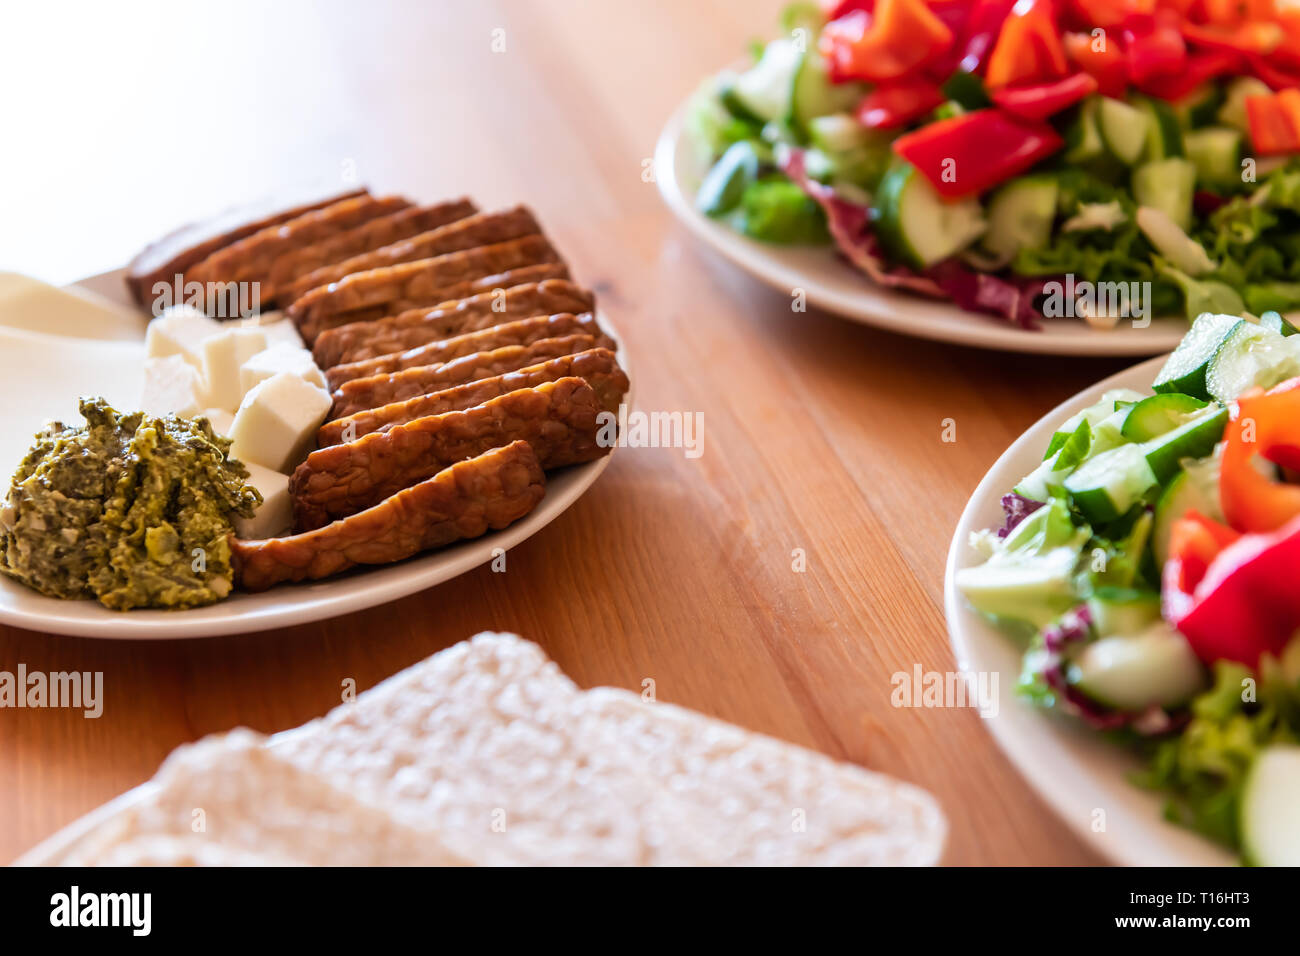 Healthy vegan vegetarian lunch or dinner green vegetables salad with table setting and tempeh slices with pesto and rice cakes Stock Photo